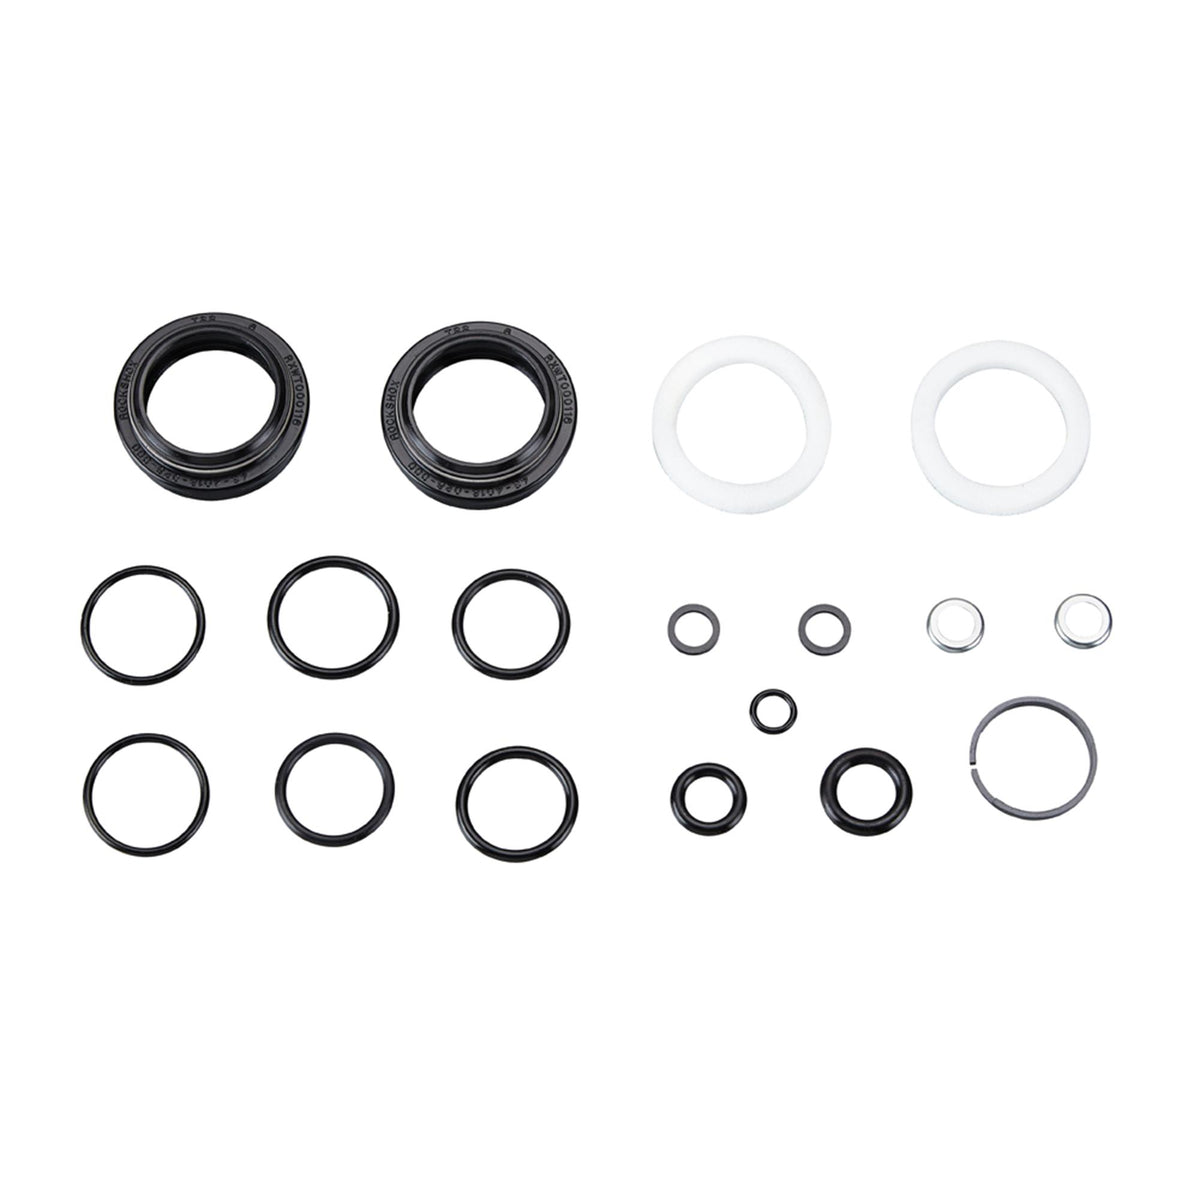 Rockshox 200 Hour/1 Year Service Kit (Includes Dust Seals, Foam Rings, O-Ring Seals, Select+ Charger Sealhead) Select+/Ultimate - SID 35mm C1/D1 (2021+) Default Title